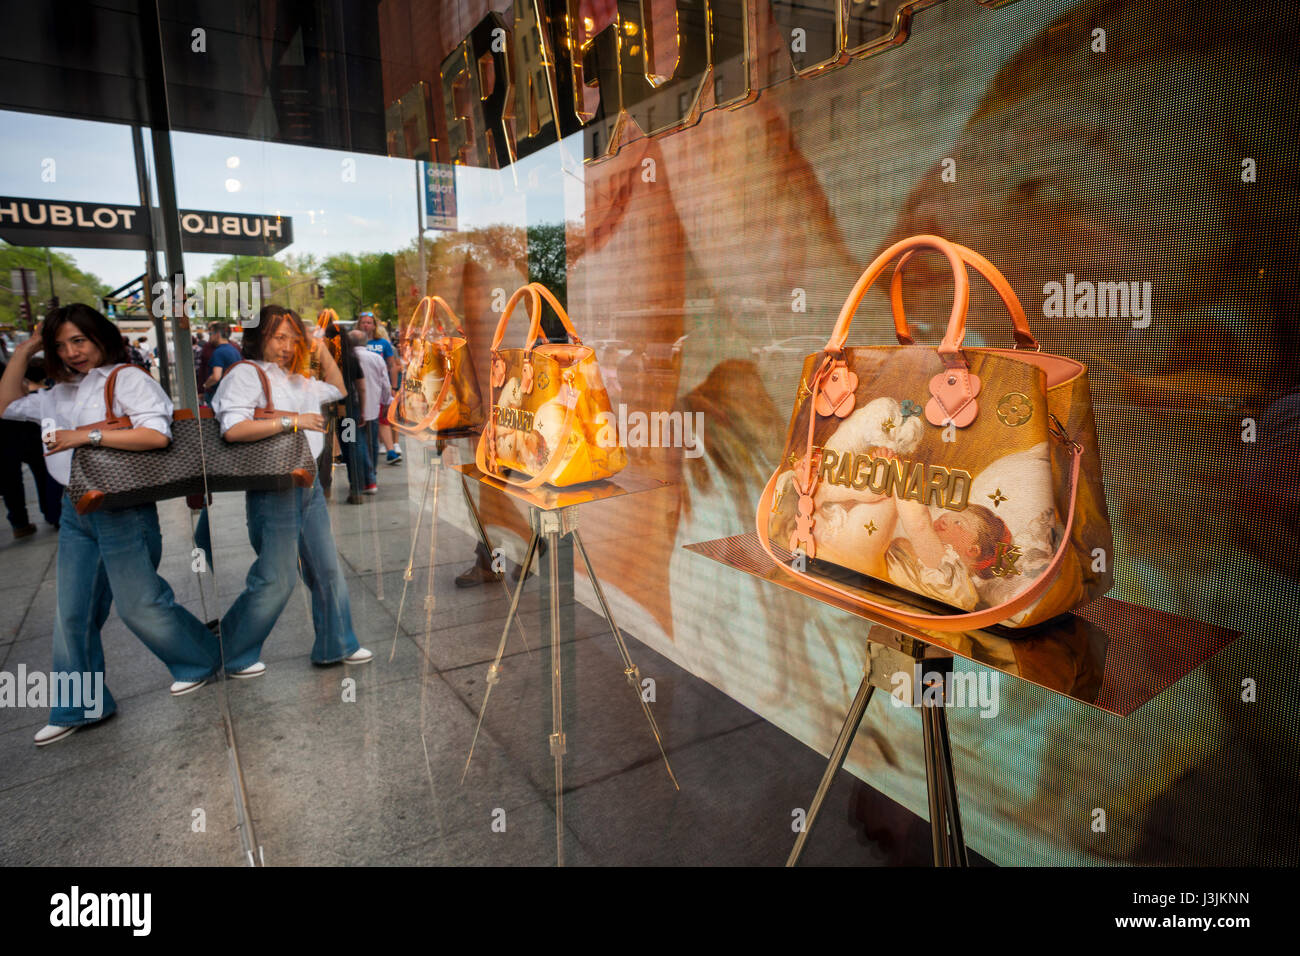 Jeff Koons limited edition handbags are seen in the window of Louis Vuitton  on Fifth Avenue in New York on Saturday, April 29, 2017, The handbags, in  appropriated image style, feature portrayals